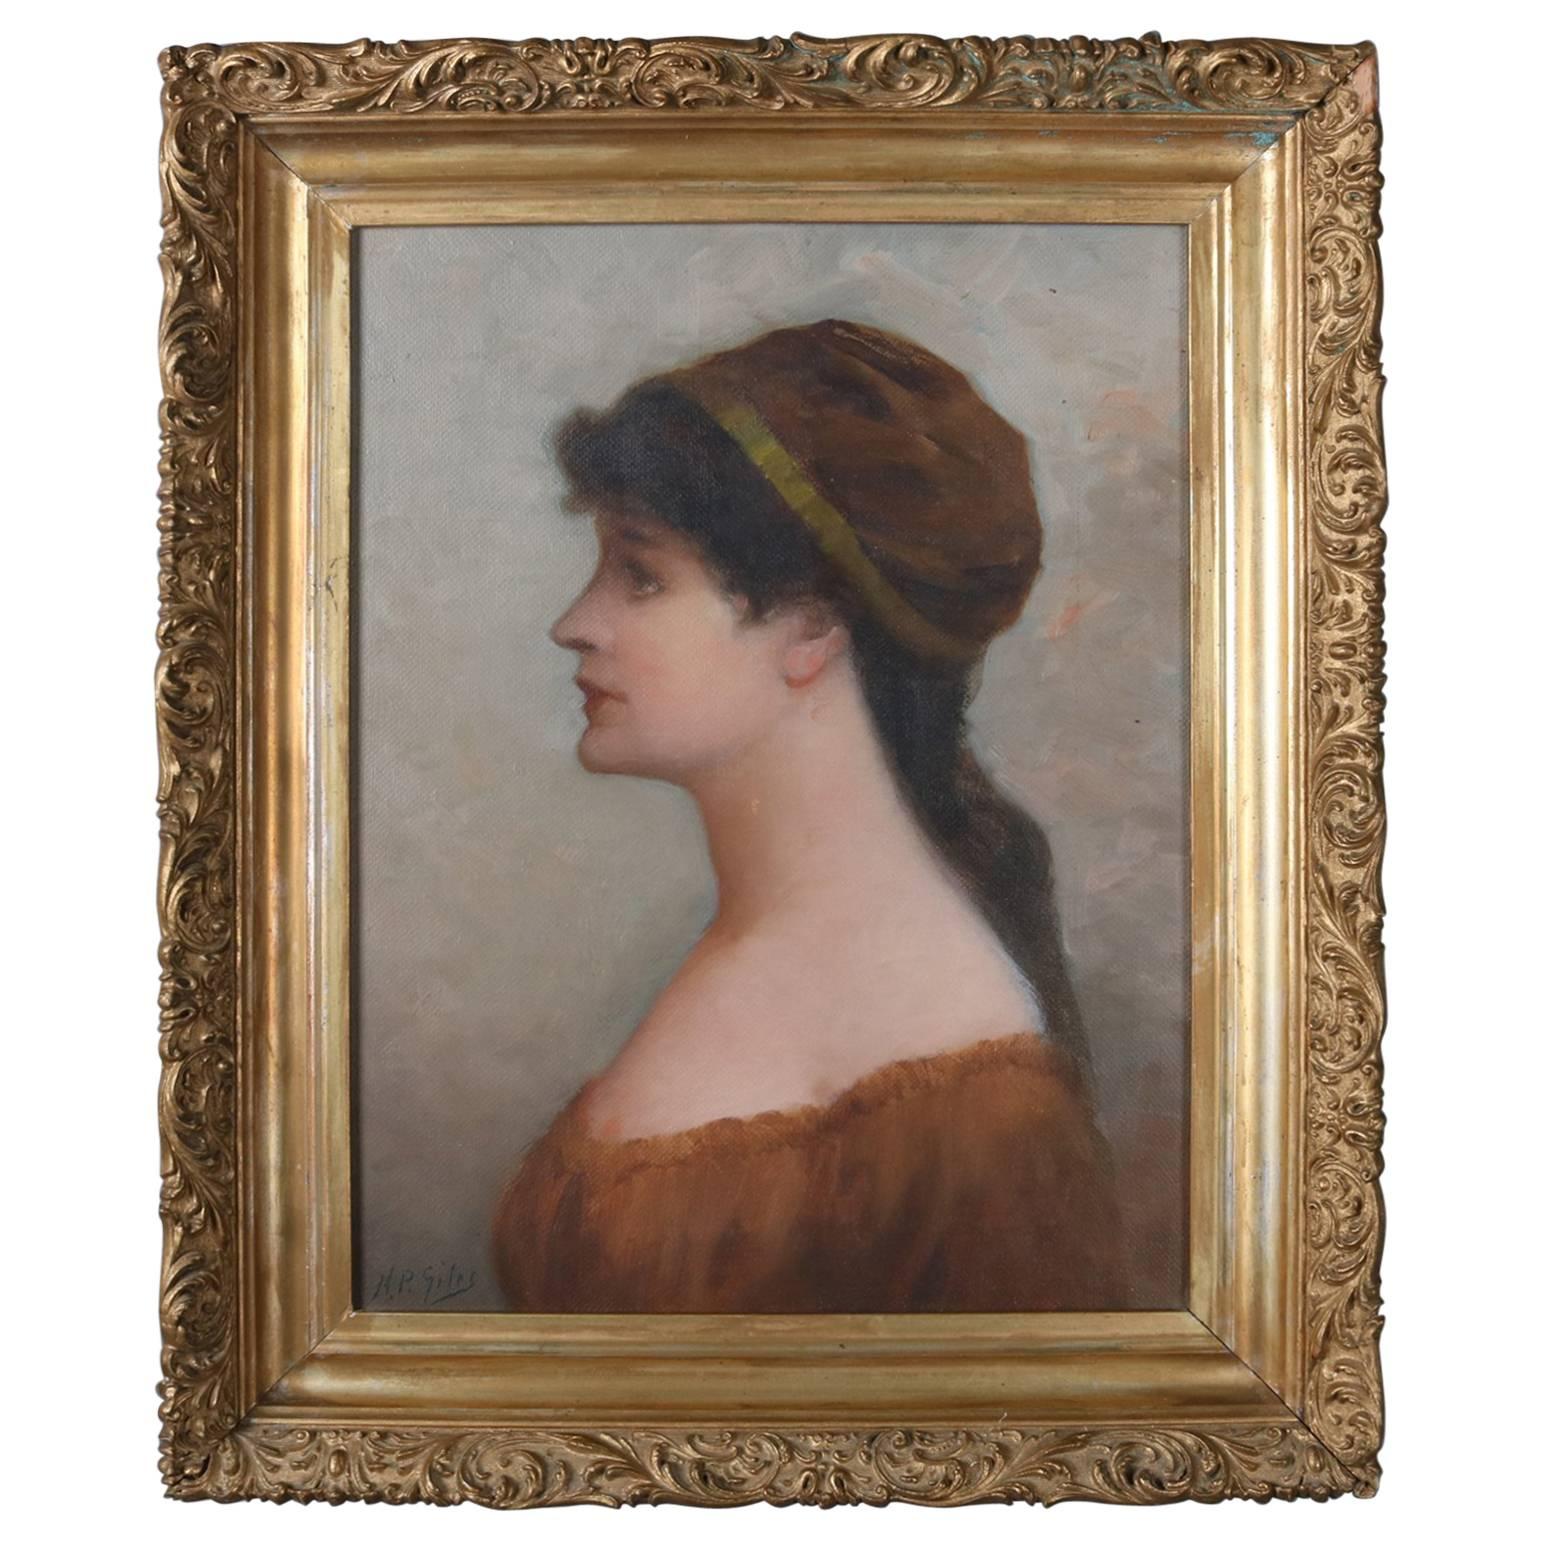 Antique Oil on Board Portrait Painting of Maiden Signed H.P. Giles, 19th Century